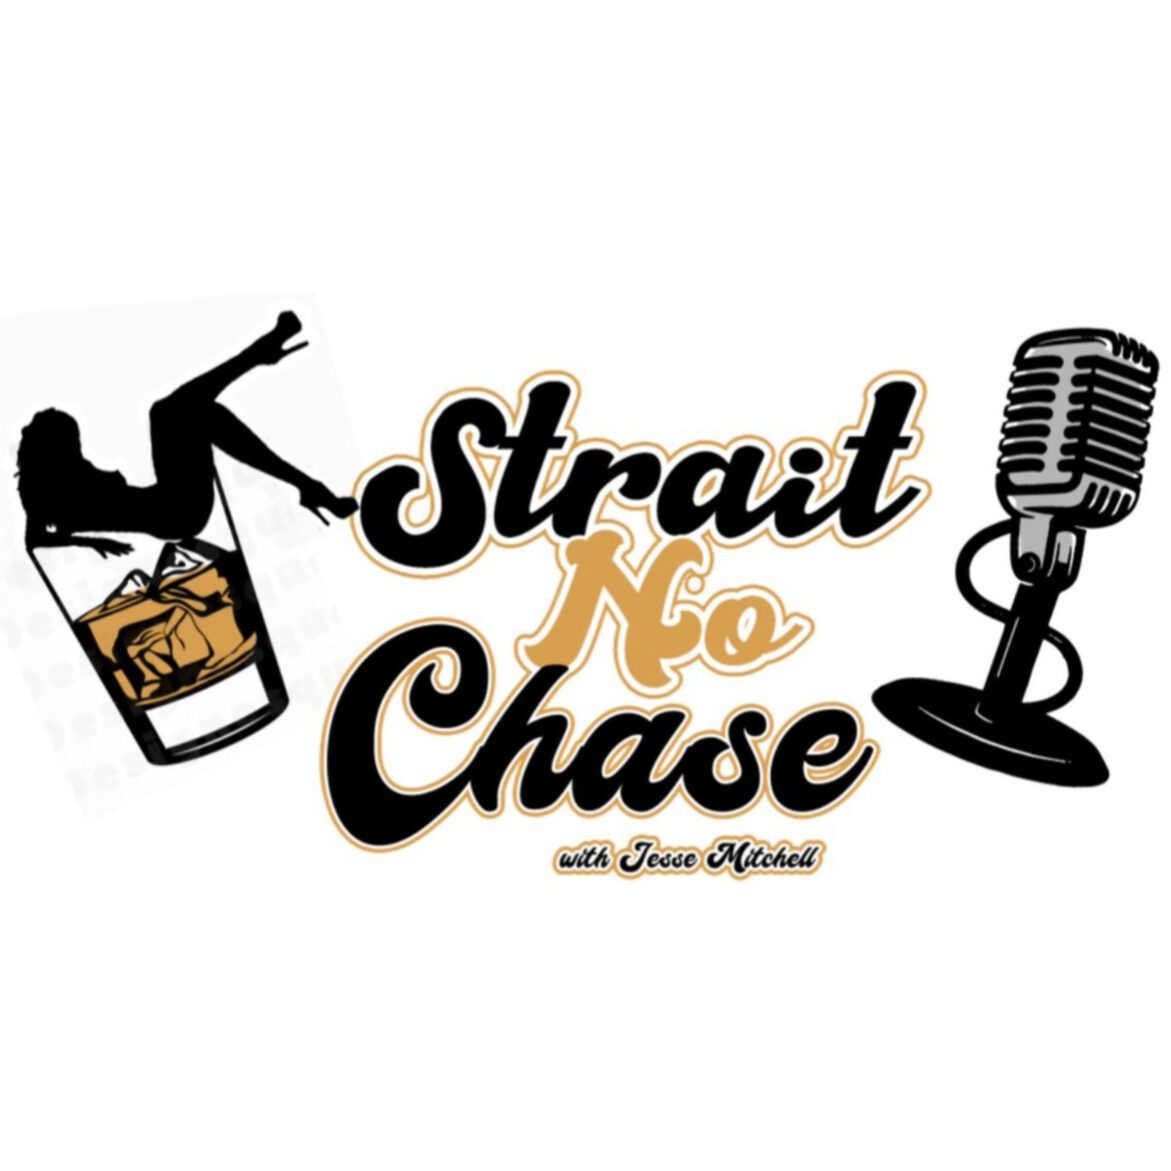 Black Podcasting - Strait No Chase EP12 Sunday at the Square with Ant Rome of the Quicksand video, Councilwoman & More!